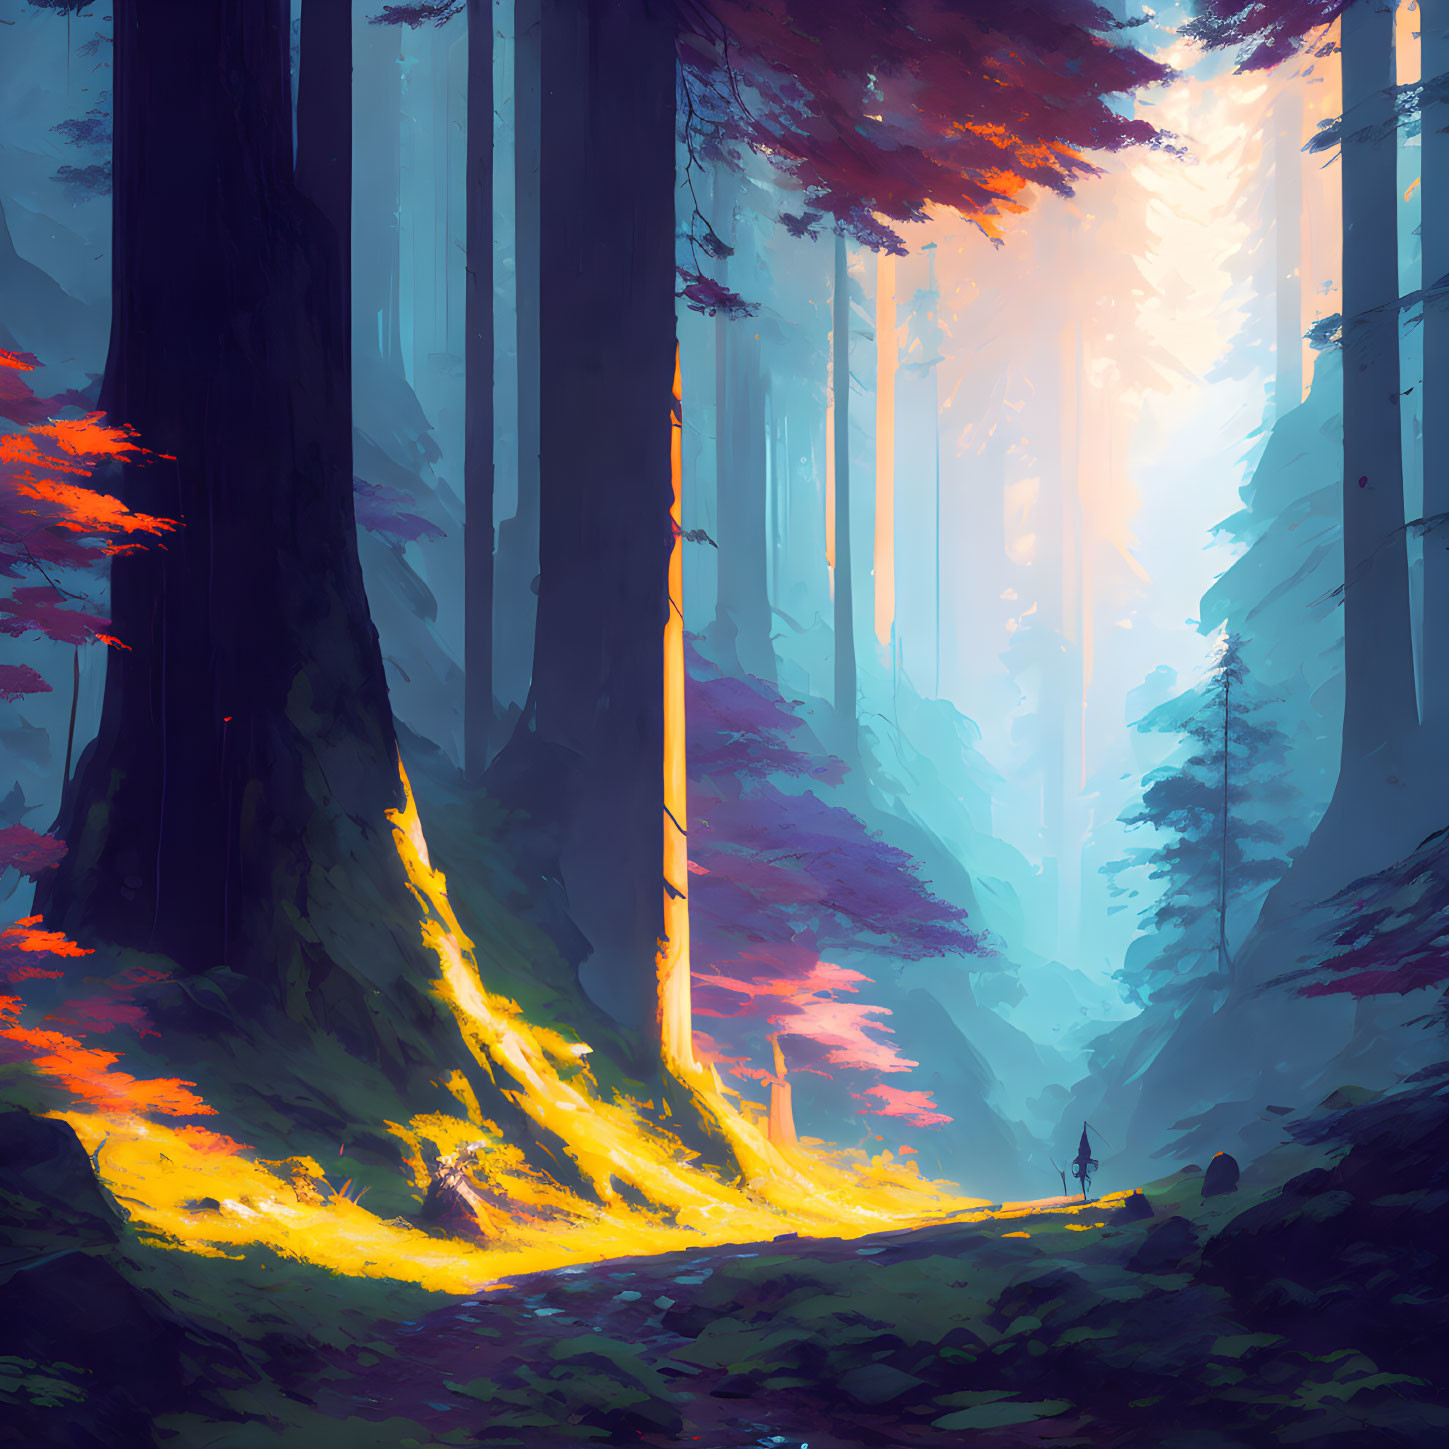 Lush forest with tall trees, sunlit path, colorful foliage, and small figure.